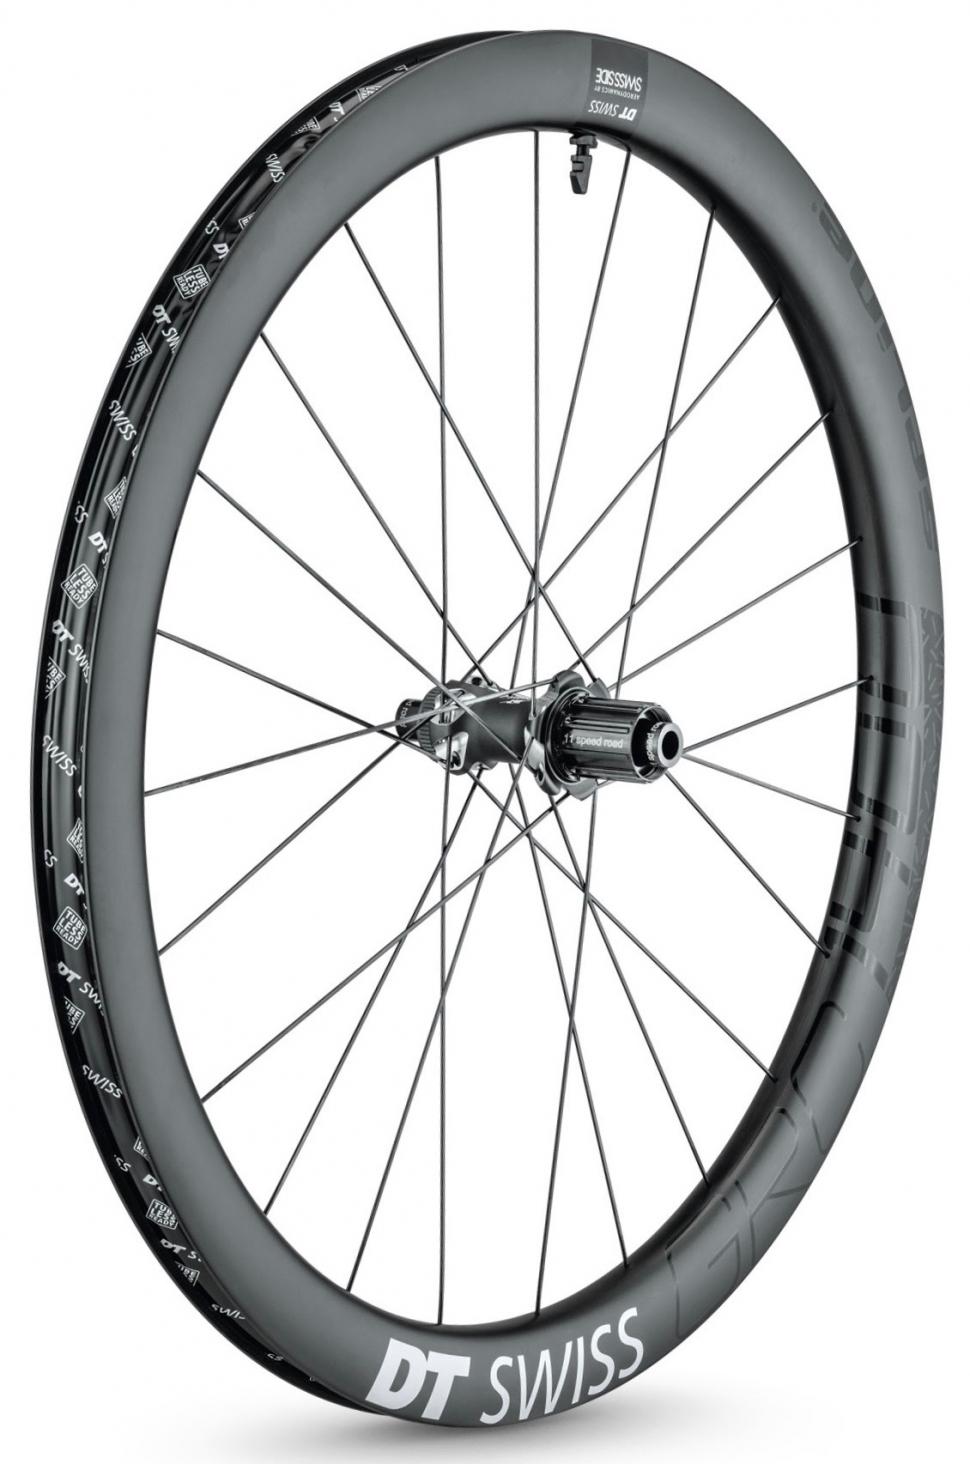 Your complete guide to DT Swiss wheels - find out which wheelset ...